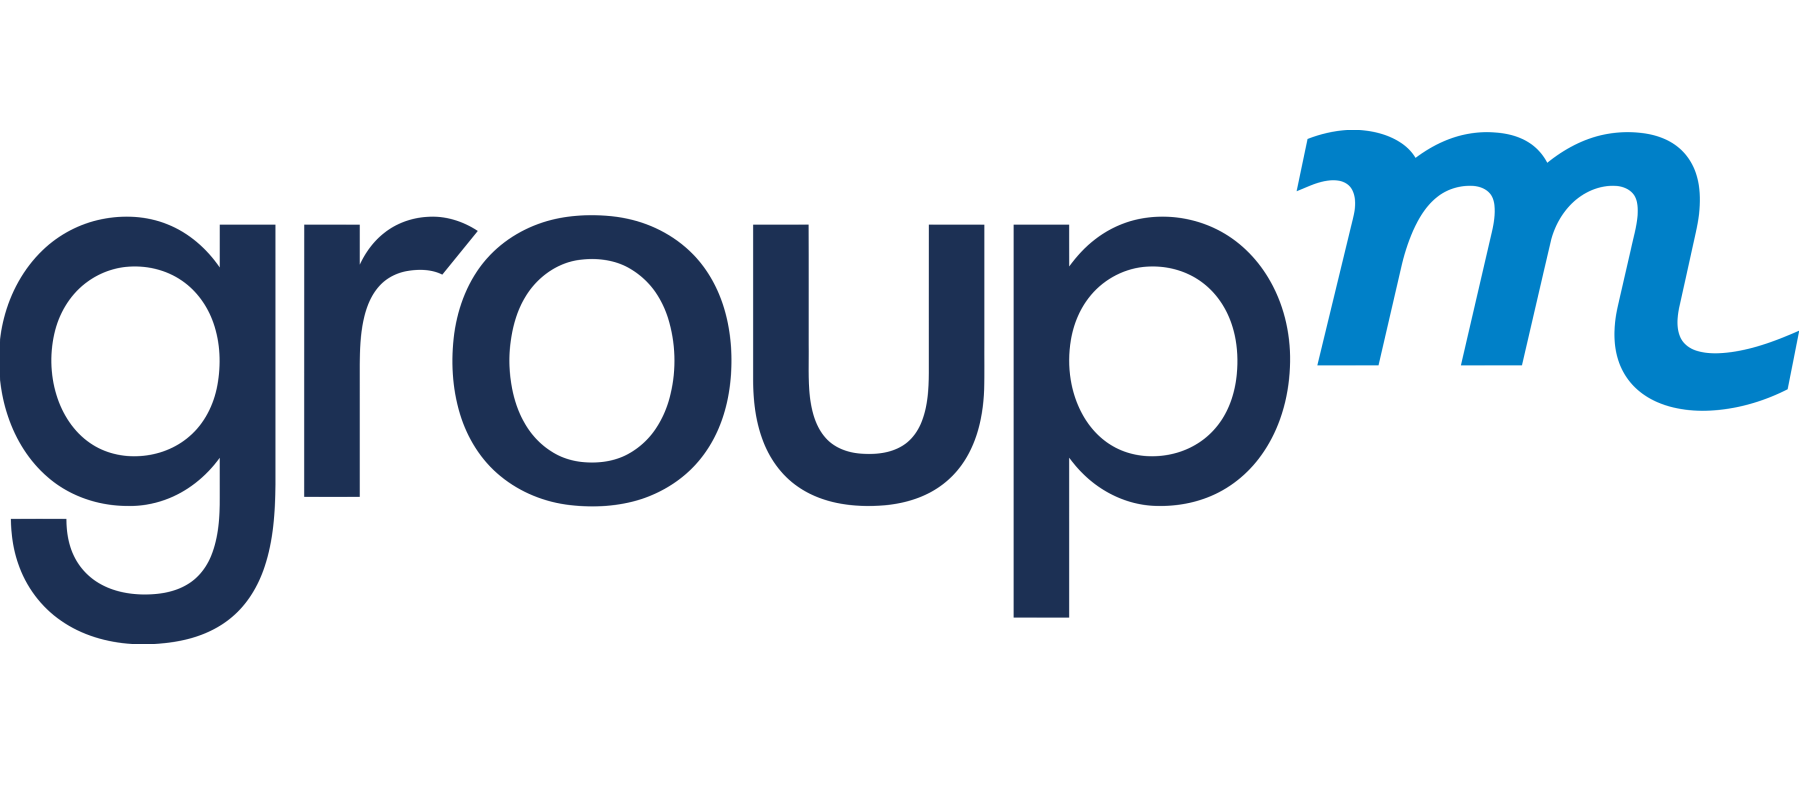 GroupM partners with Google to create and launch website accessibility workshop for clients